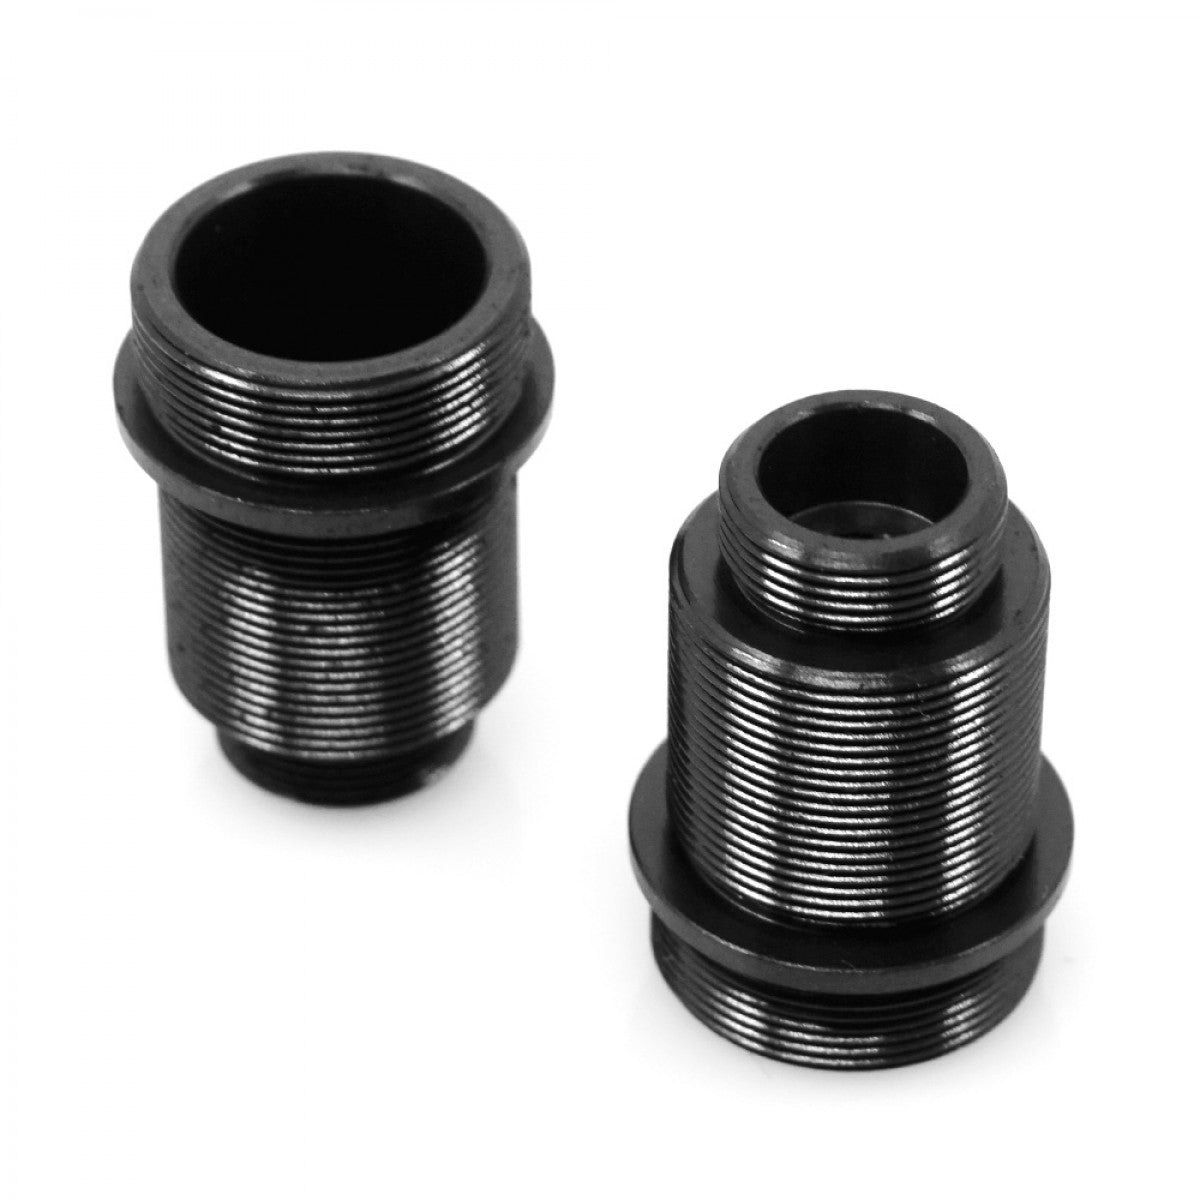 Xpress XP-10057 Aluminum Damper Cylinder Shock Body for XQ1S and XM1S 2pcs